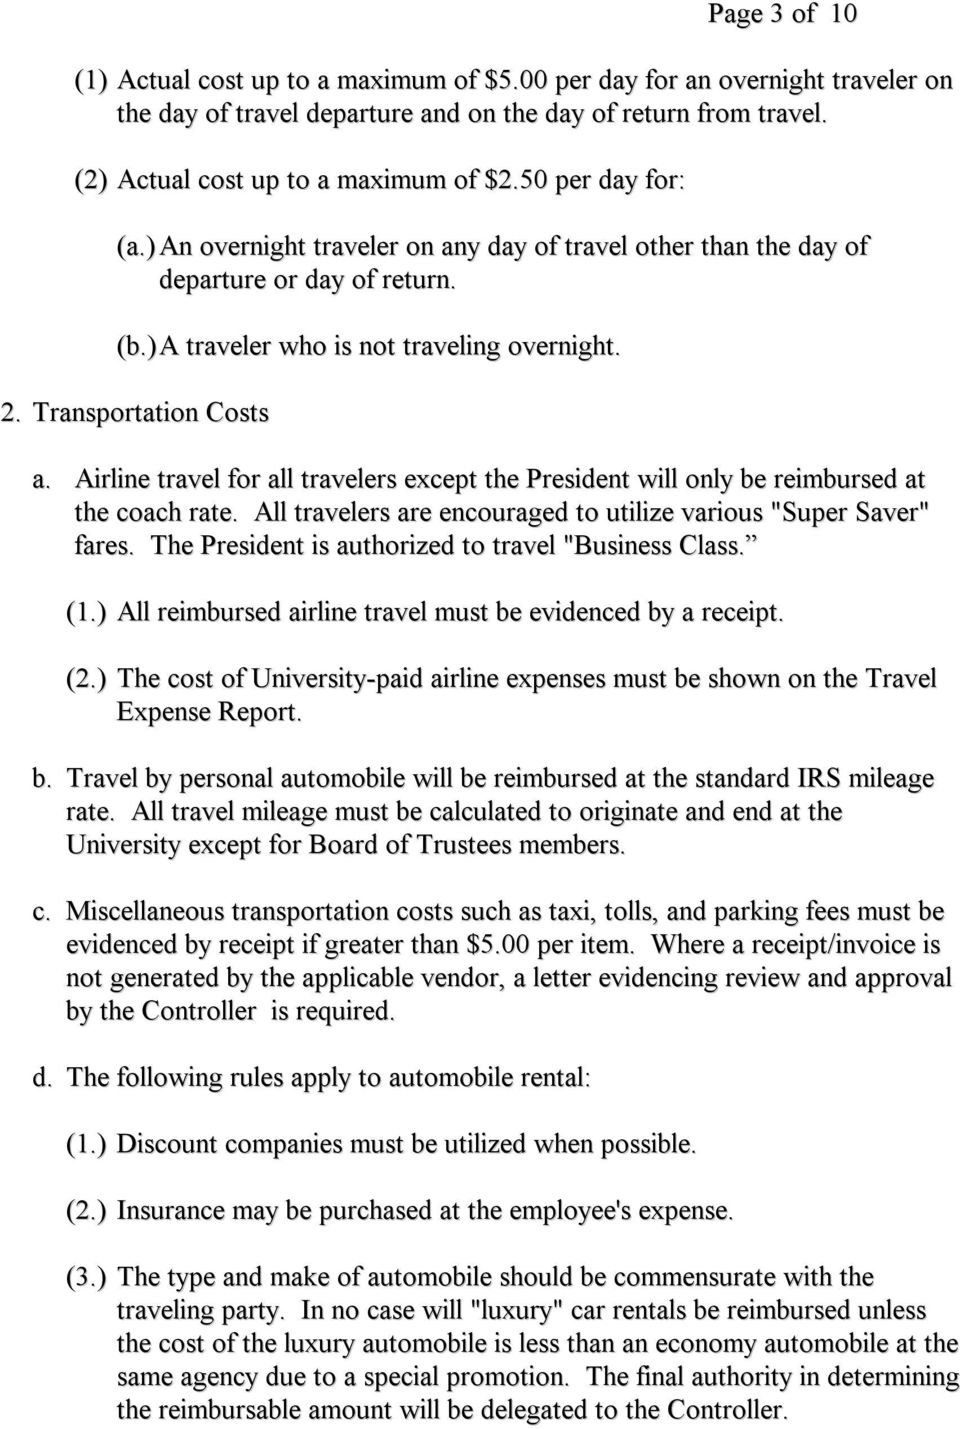 Airline travel for all travelers except the President will only be reimbursed at the coach rate. All travelers are encouraged to utilize various "Super Saver" fares.